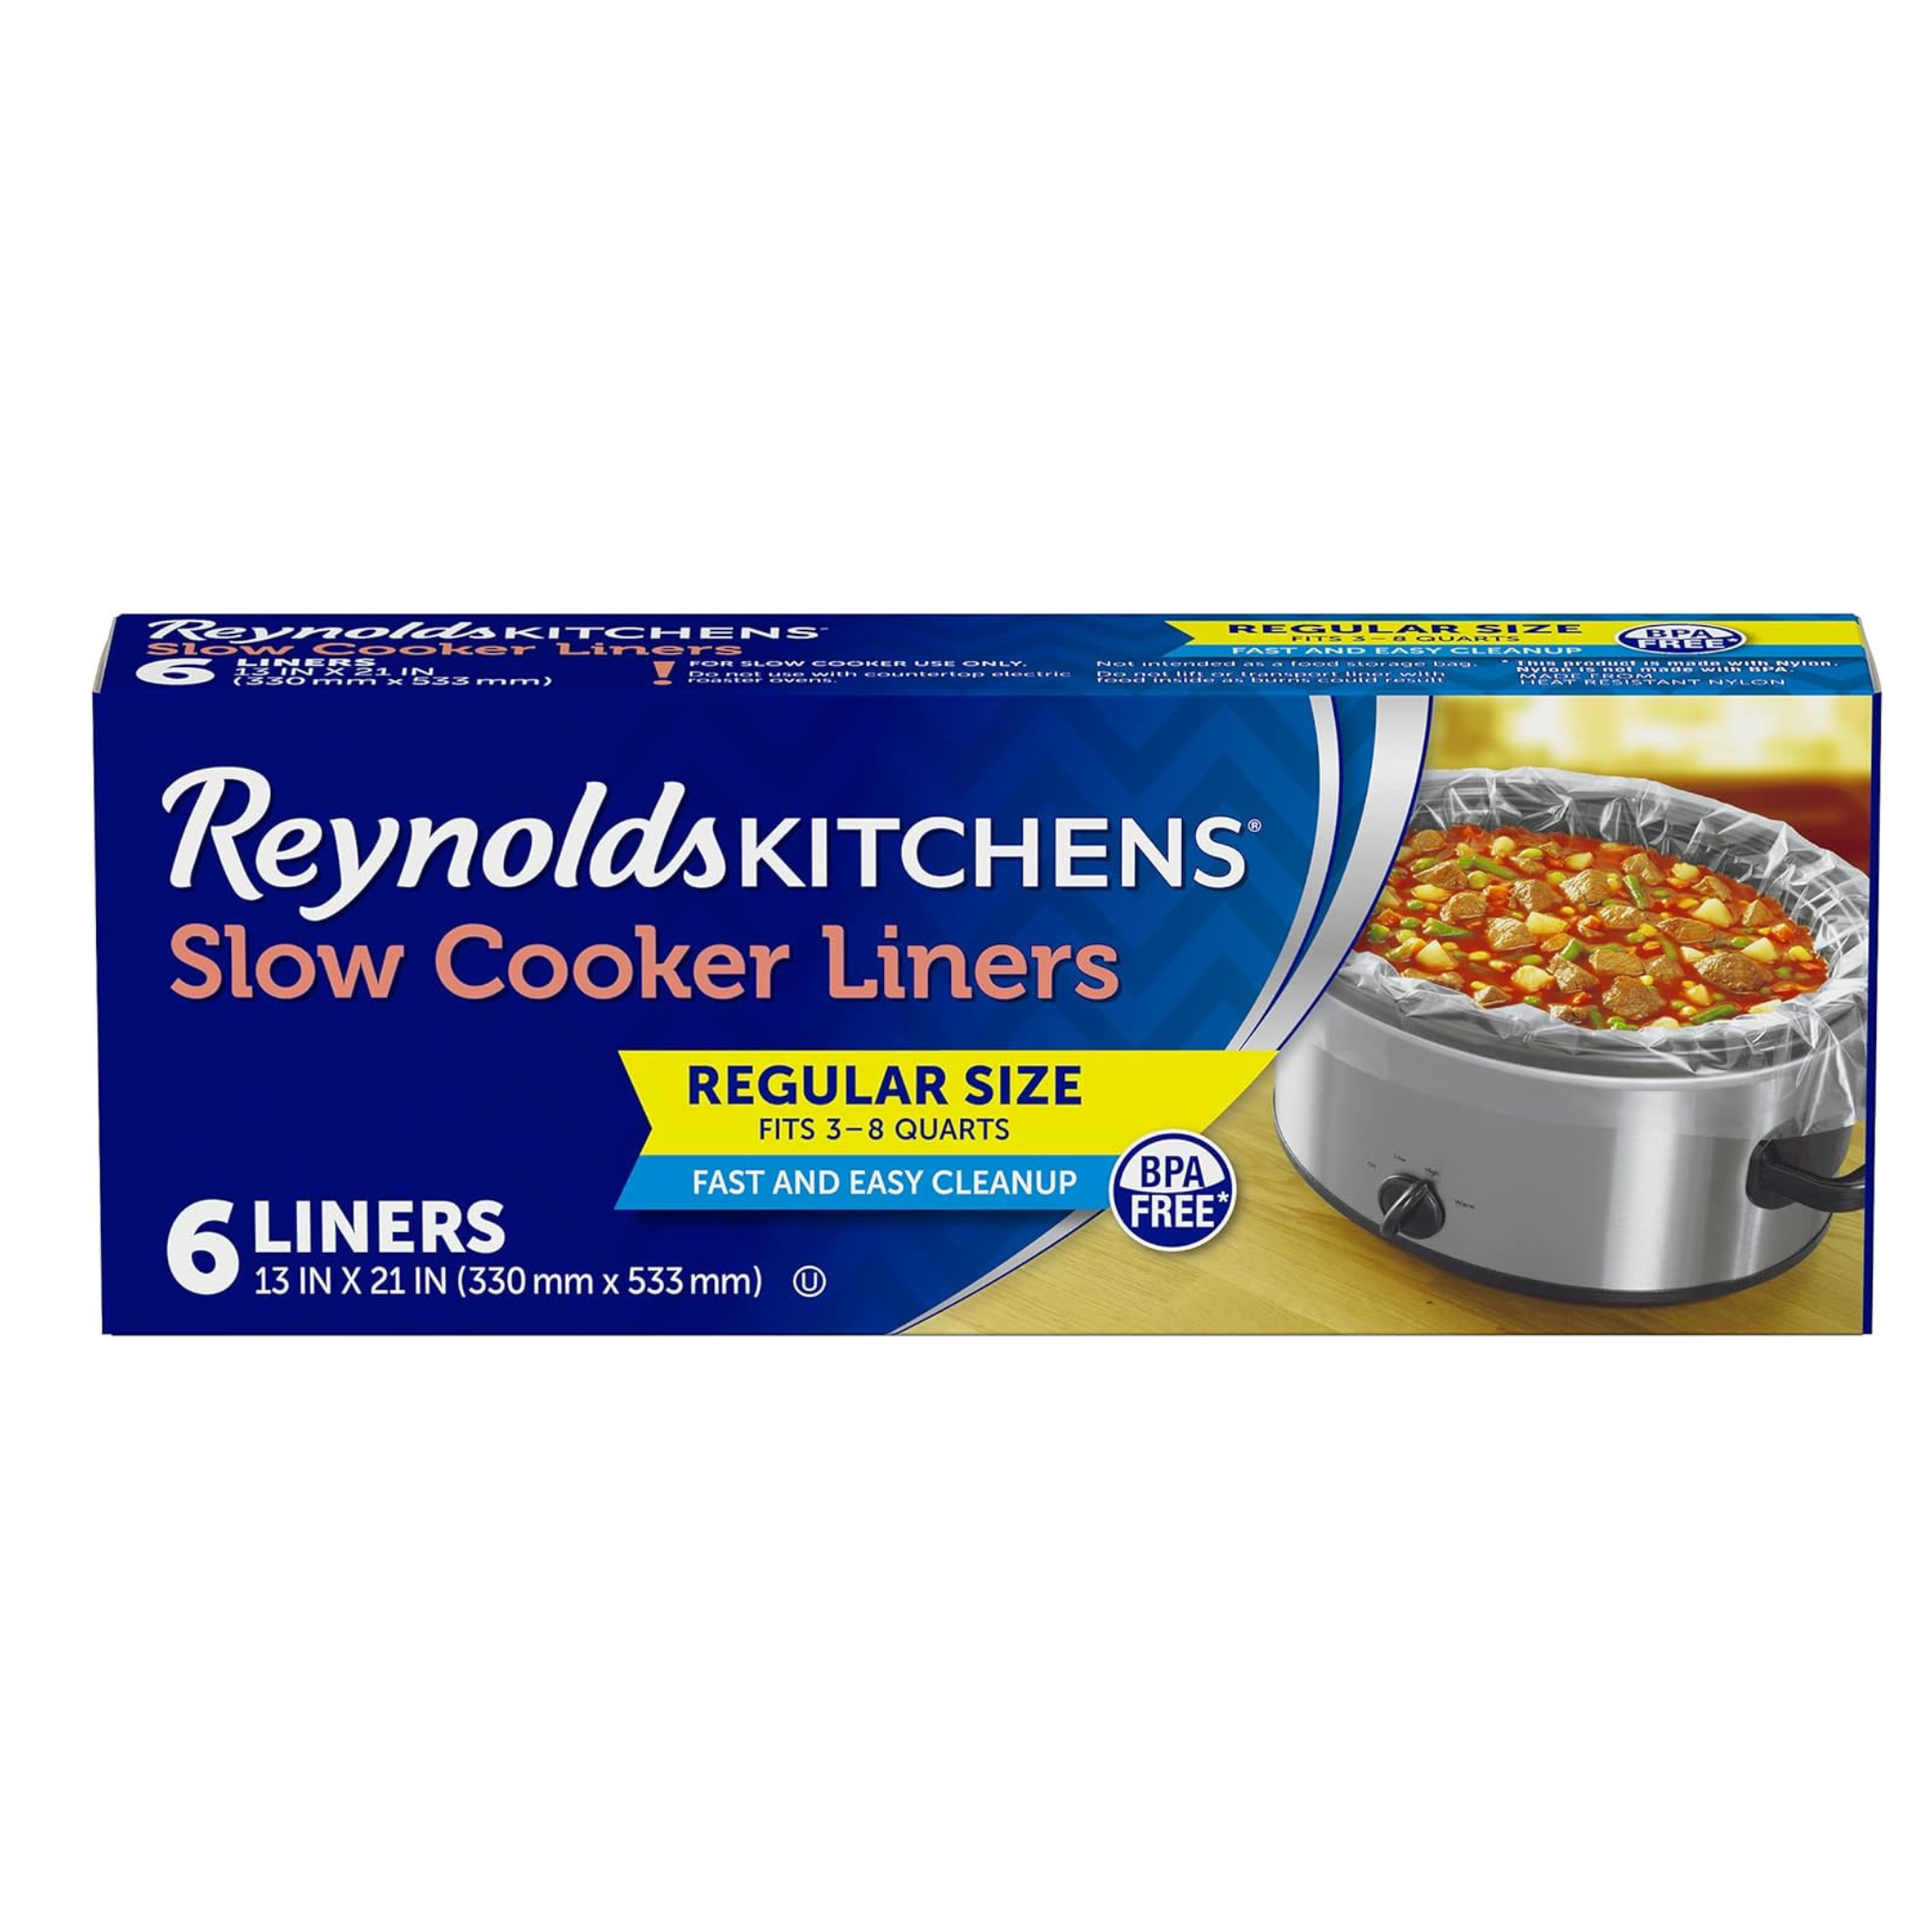 Reynolds Kitchens Slow Cooker Liners (Fits 3-8 Quarts), 6 Count